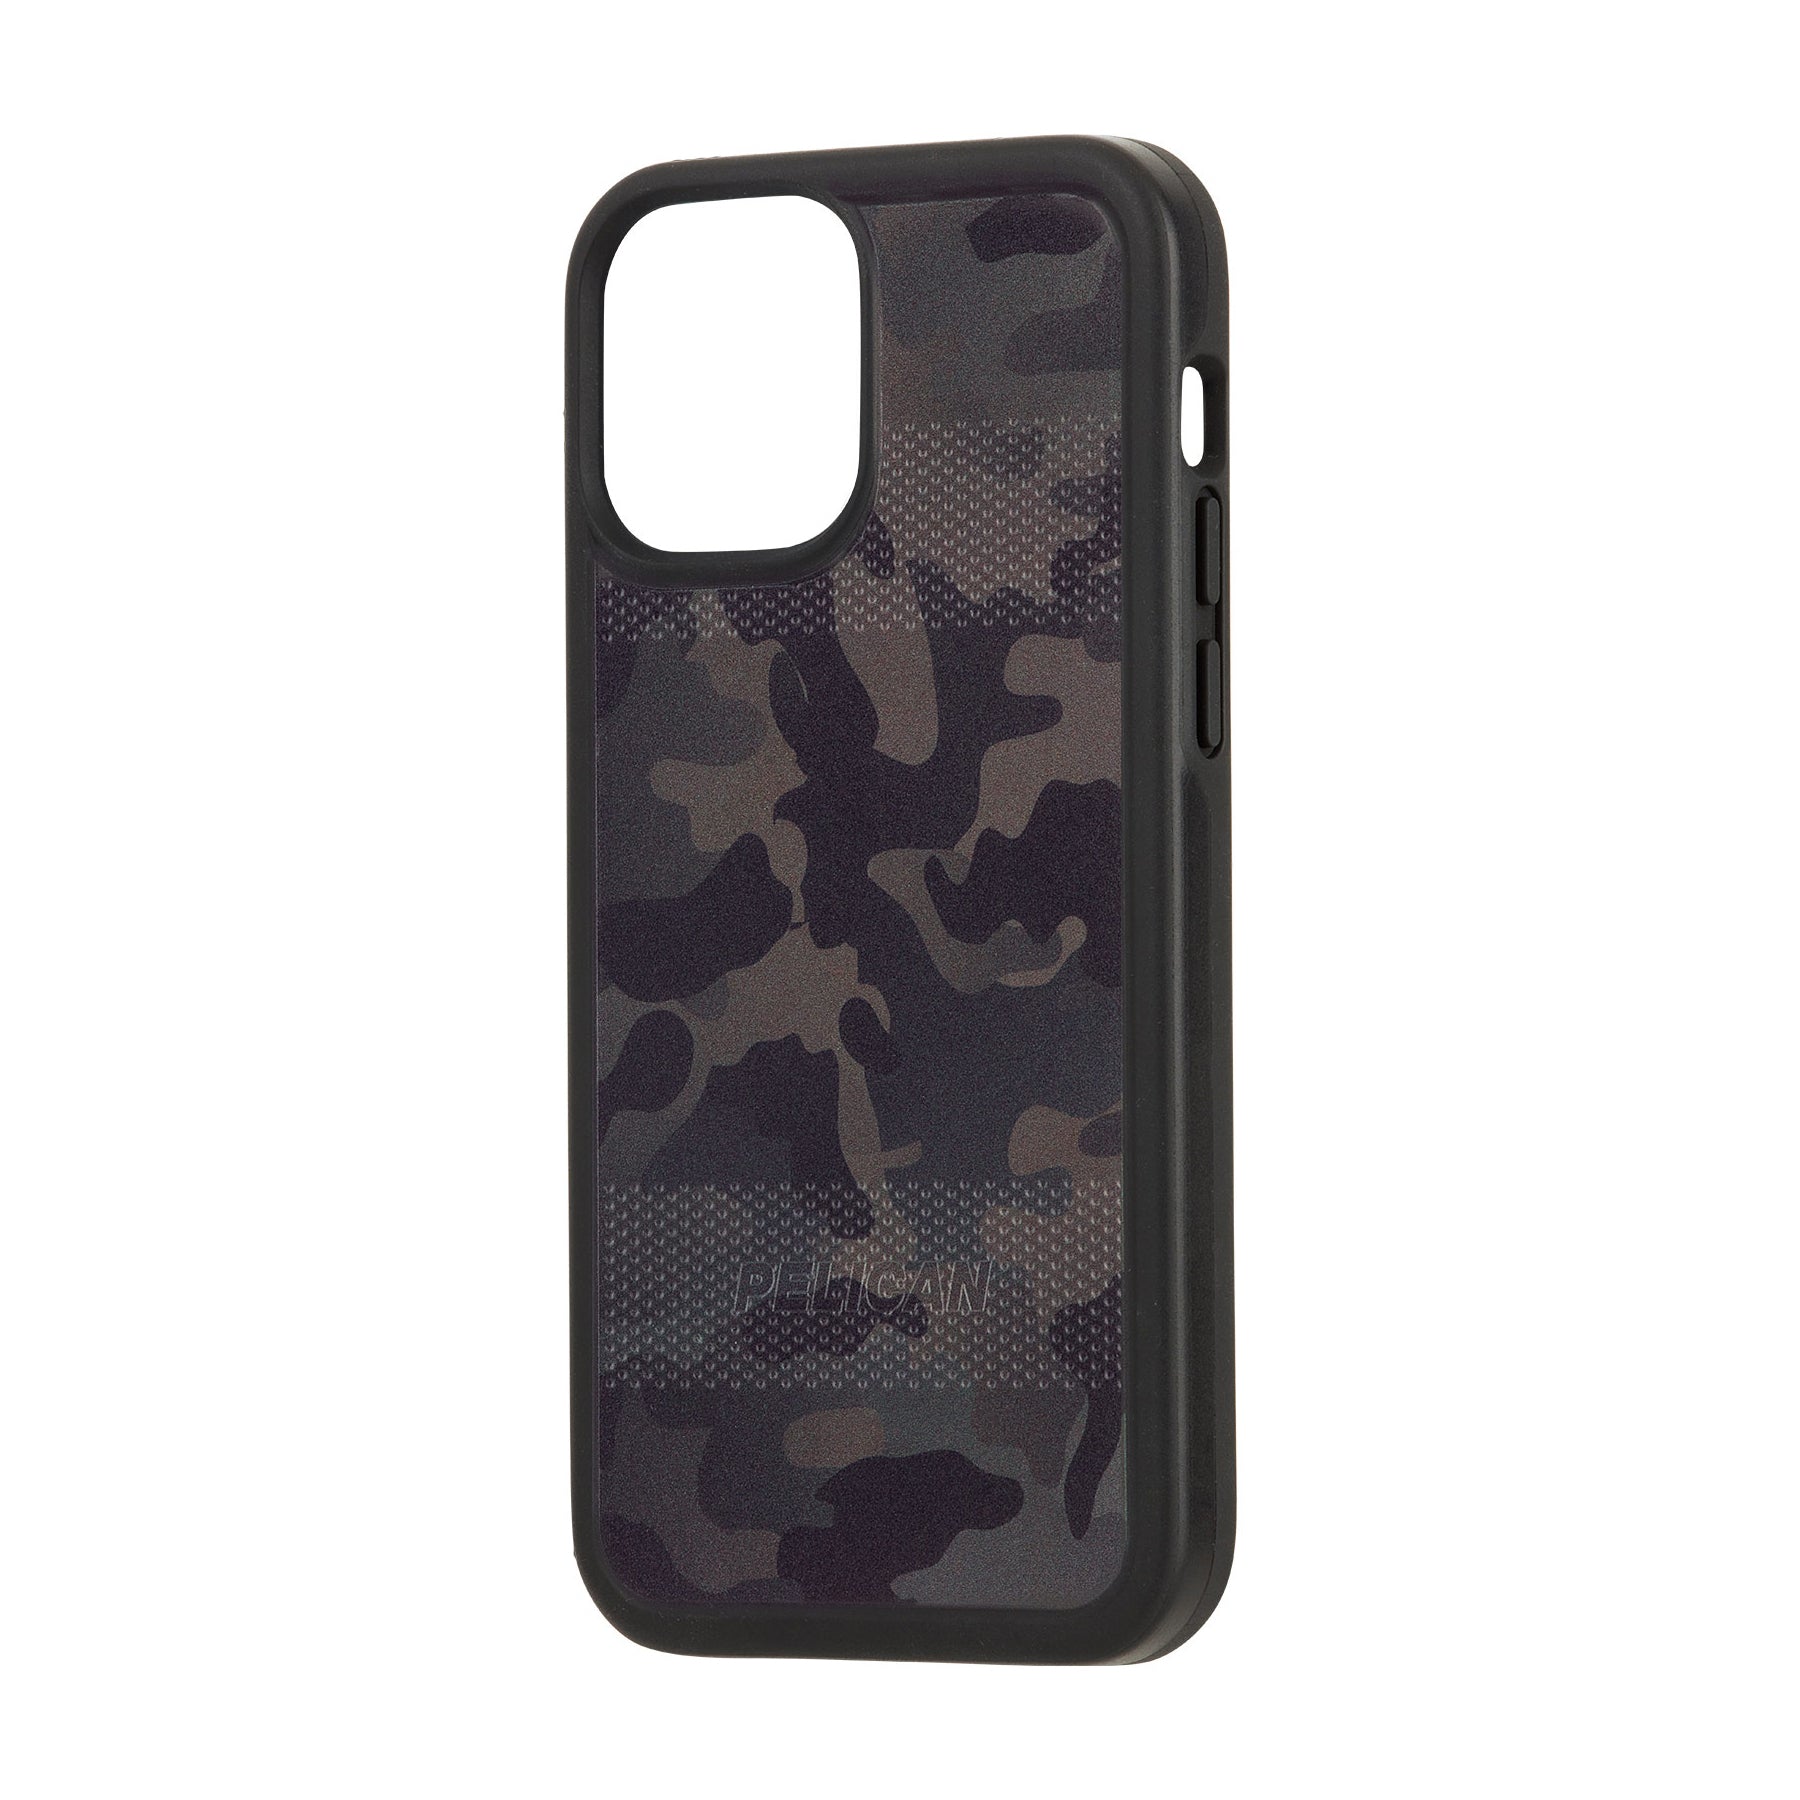 Pelican Protector Slim Rugged Case For iPhone iPhone 12 Pro Max - CAMO GREEN - Mac Addict